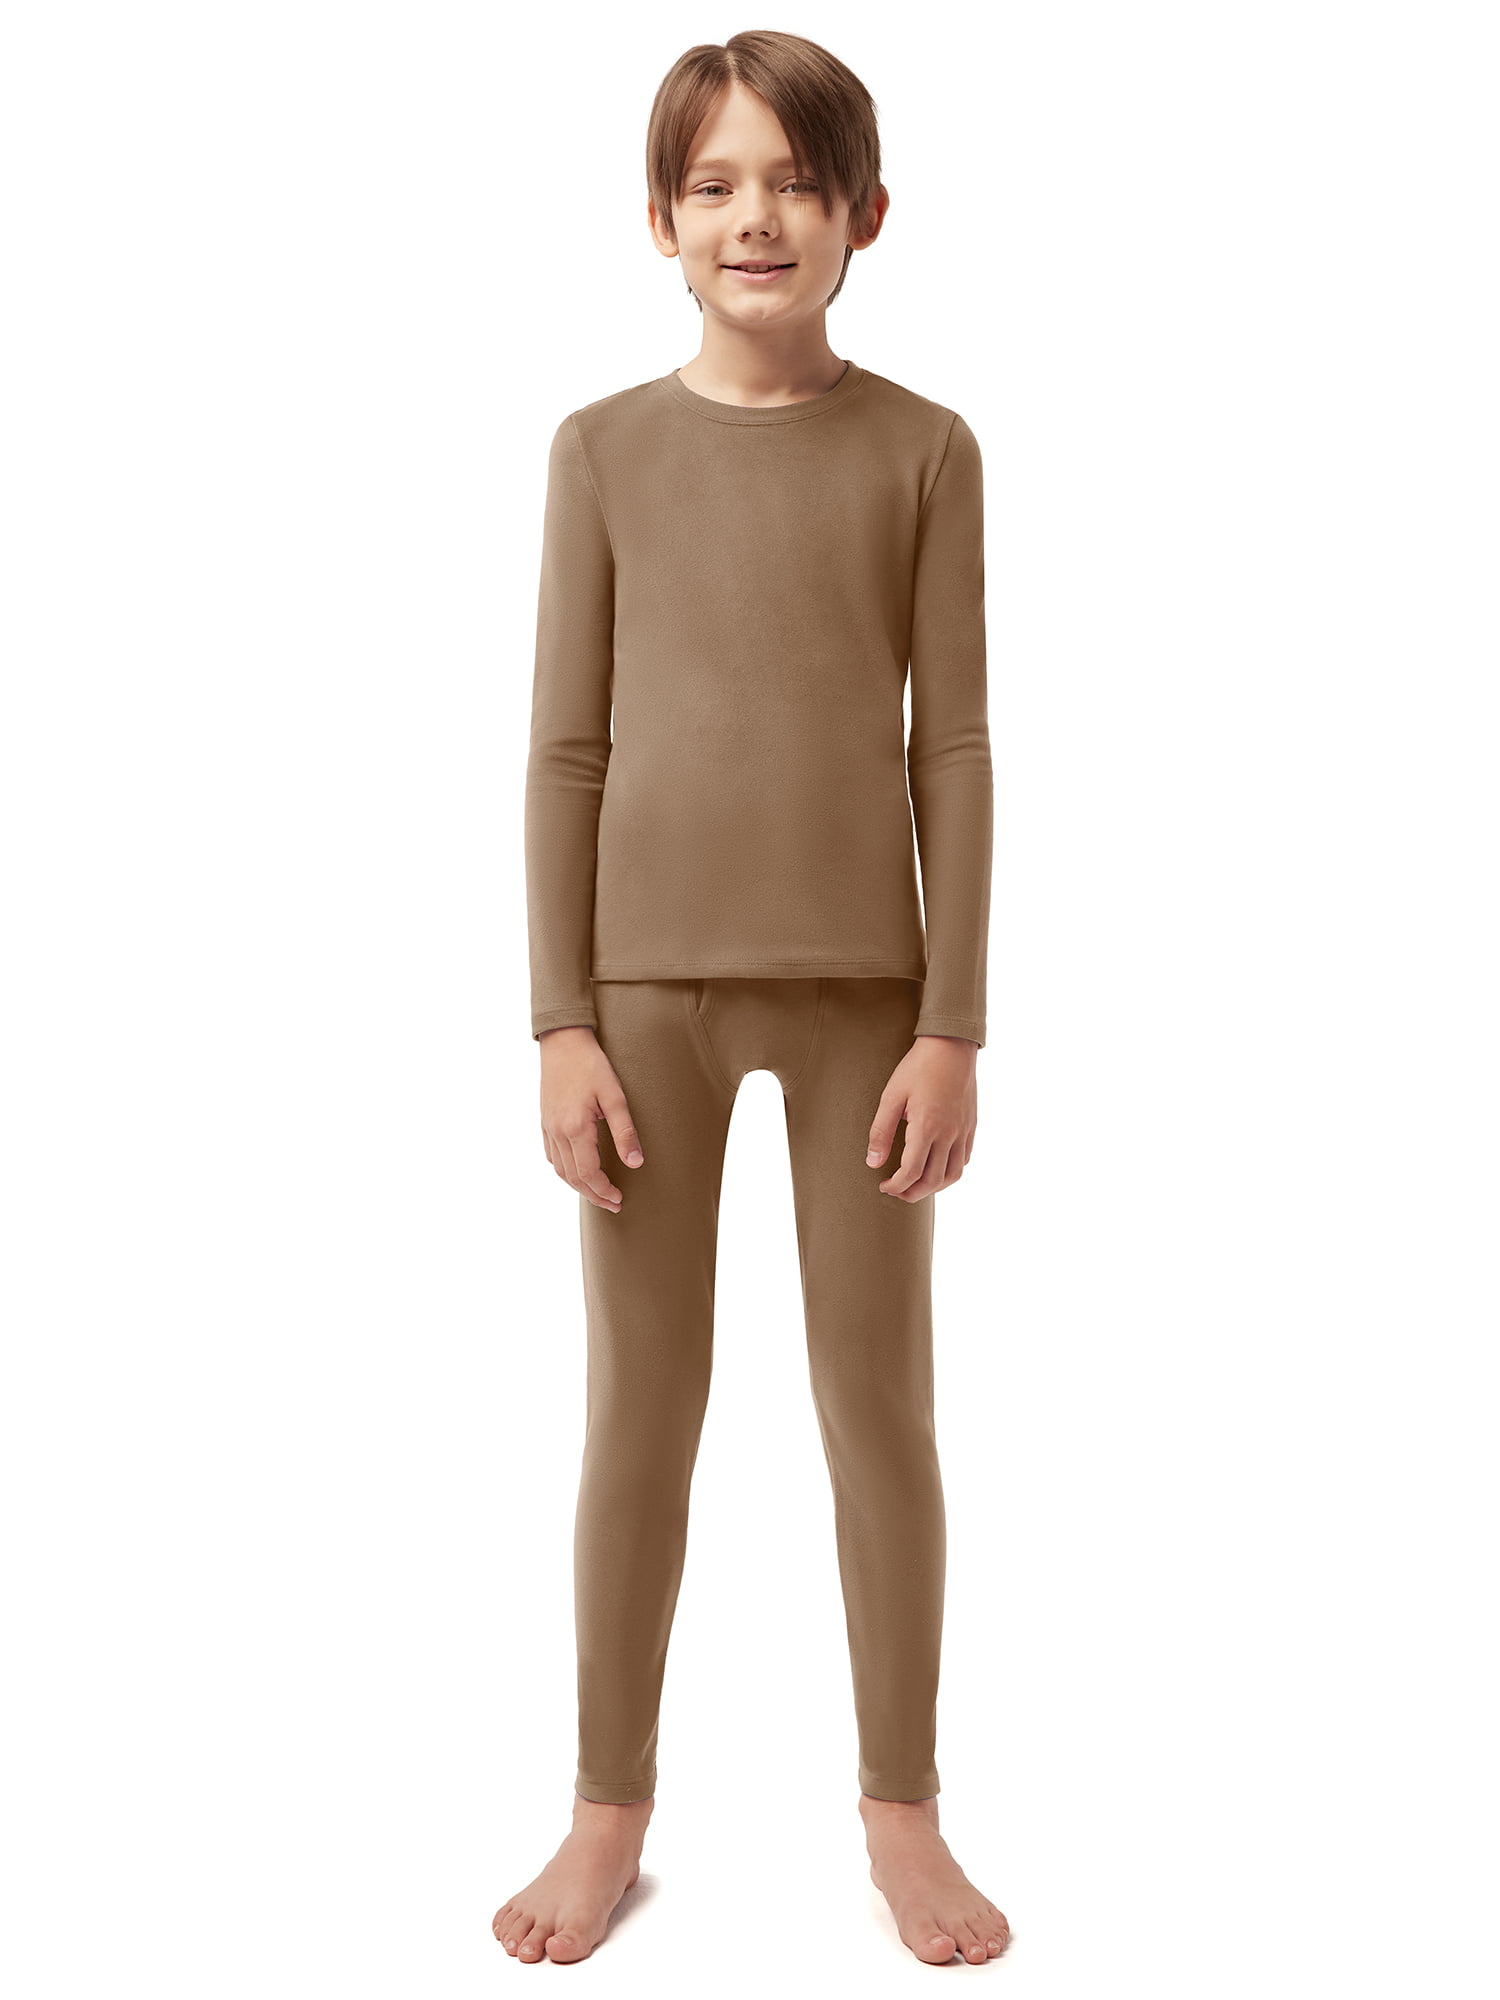 SIORO Boys Thermal Underwear Set Soft Double Fleece Warm Long Johns Set  Base Layer with Fly, Nude, Year 14 